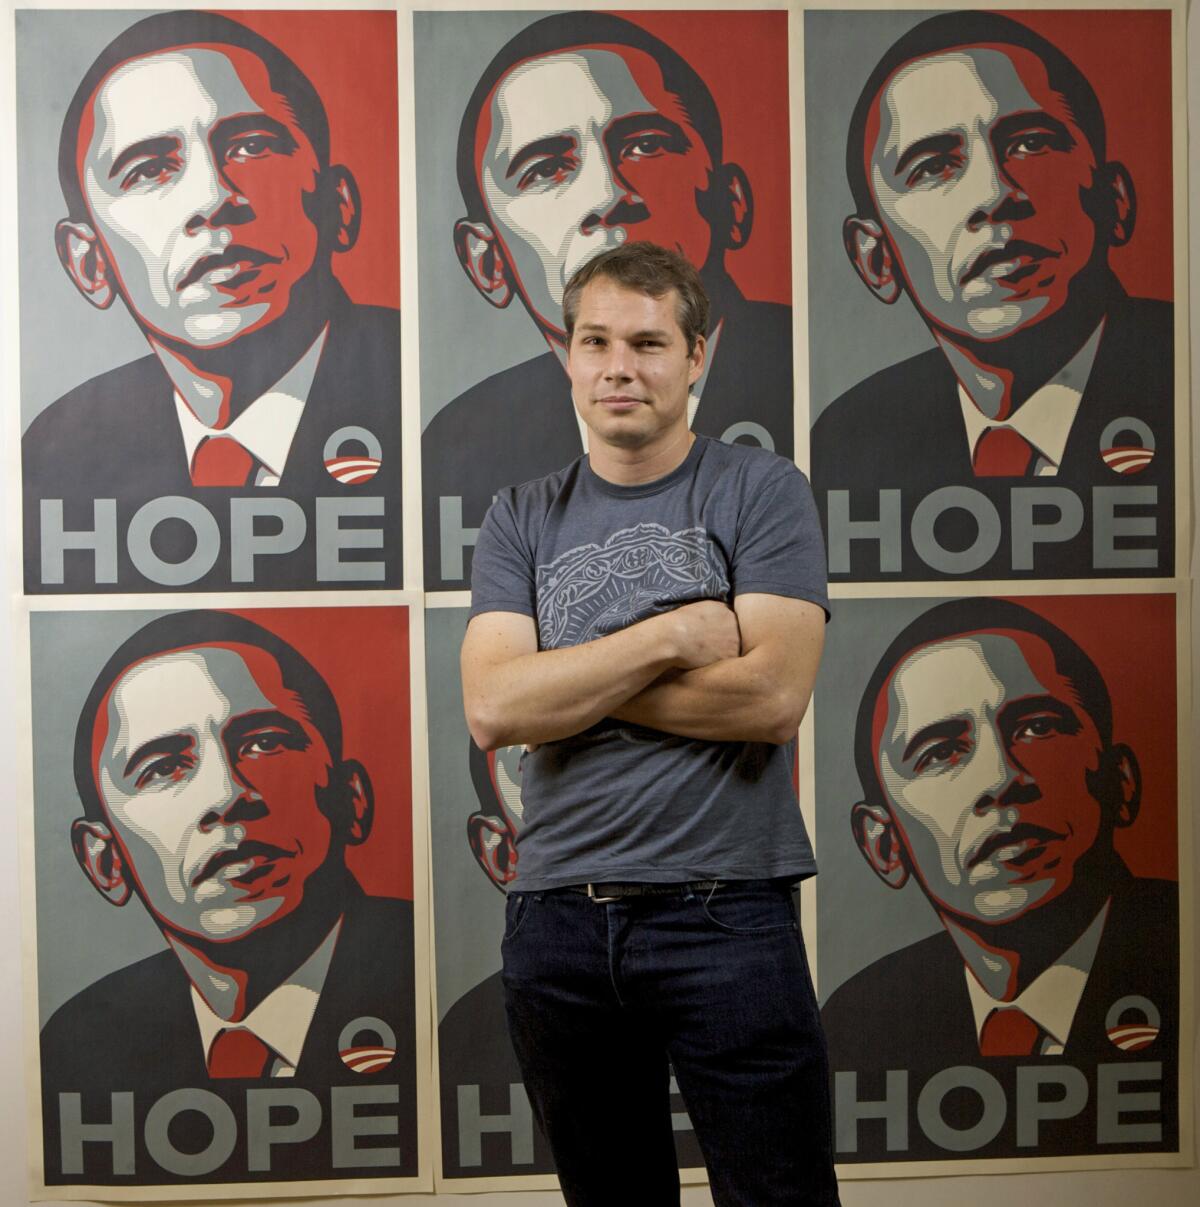 Los Angeles street artist Shepard Fairey in front of the Barack Obama "hope" artwork for which he is most famous.